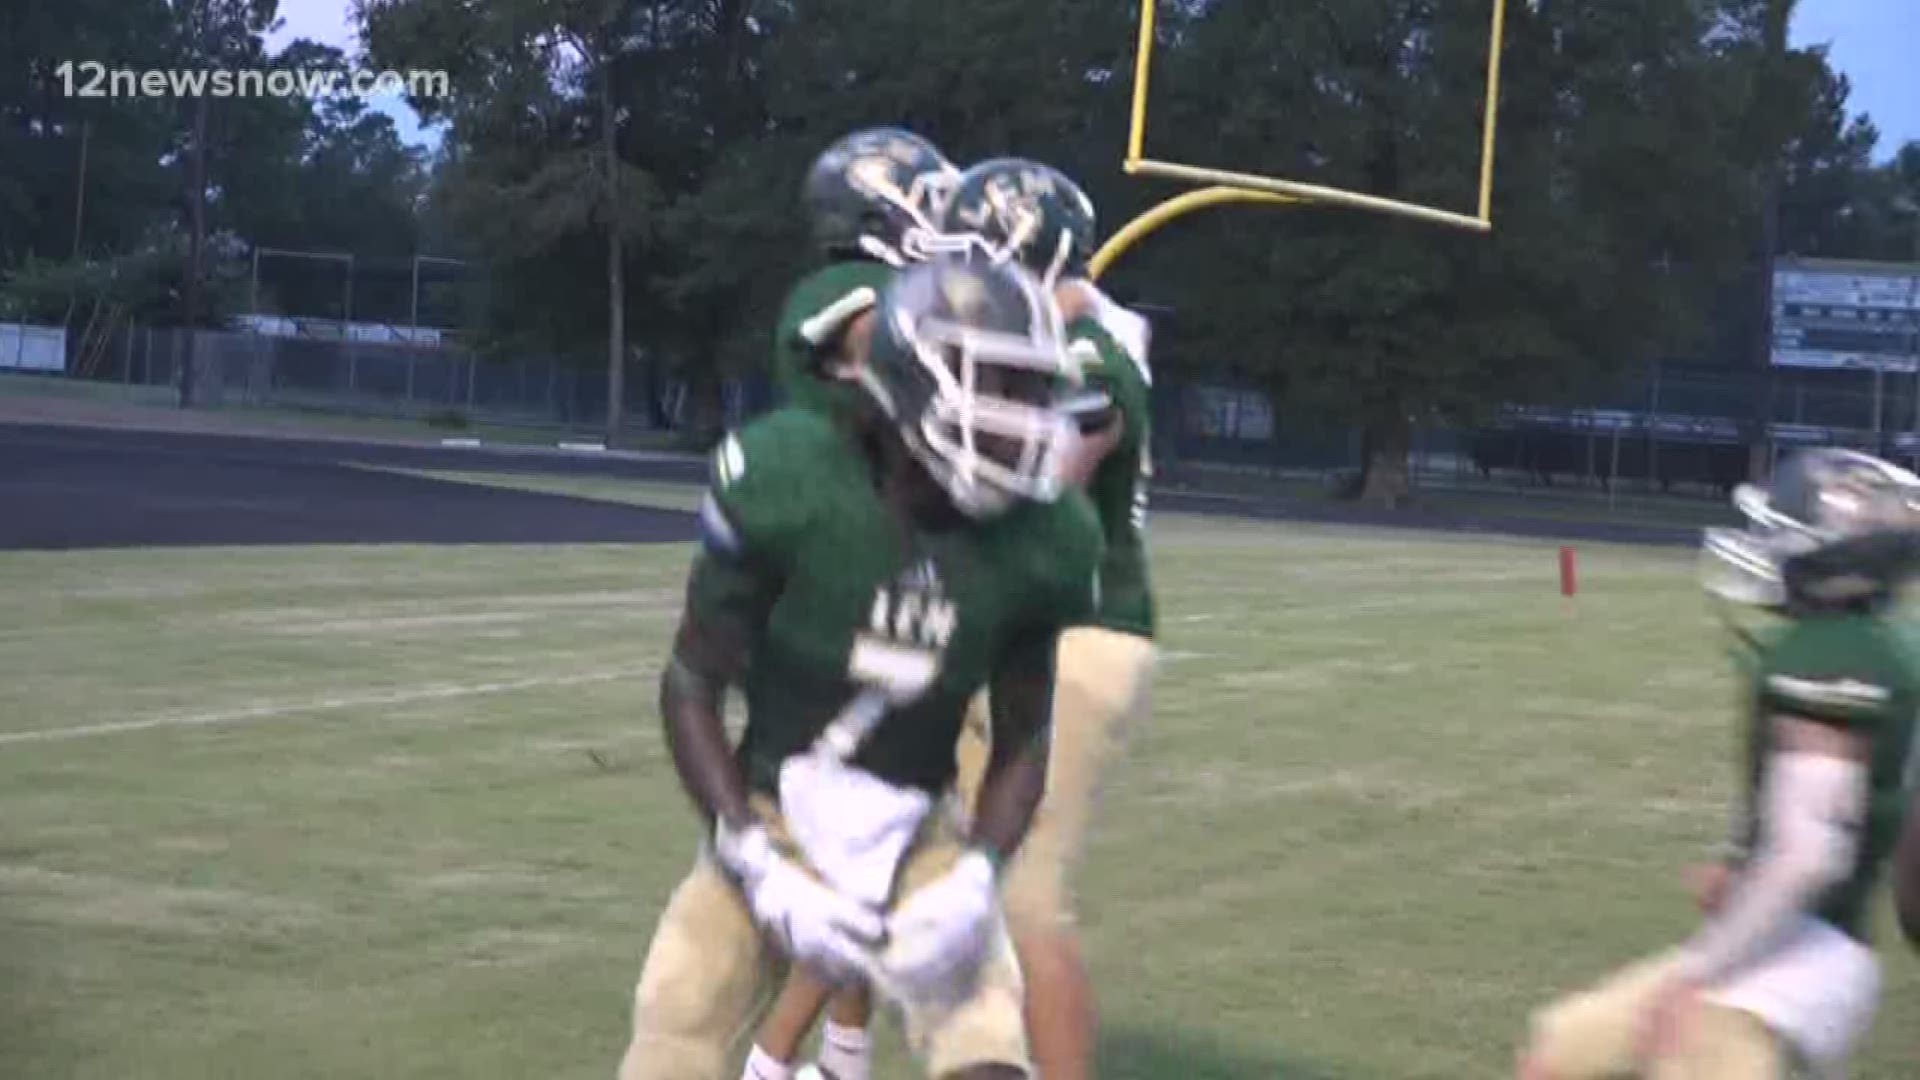 LCM aims for first (2-0) start since 2011